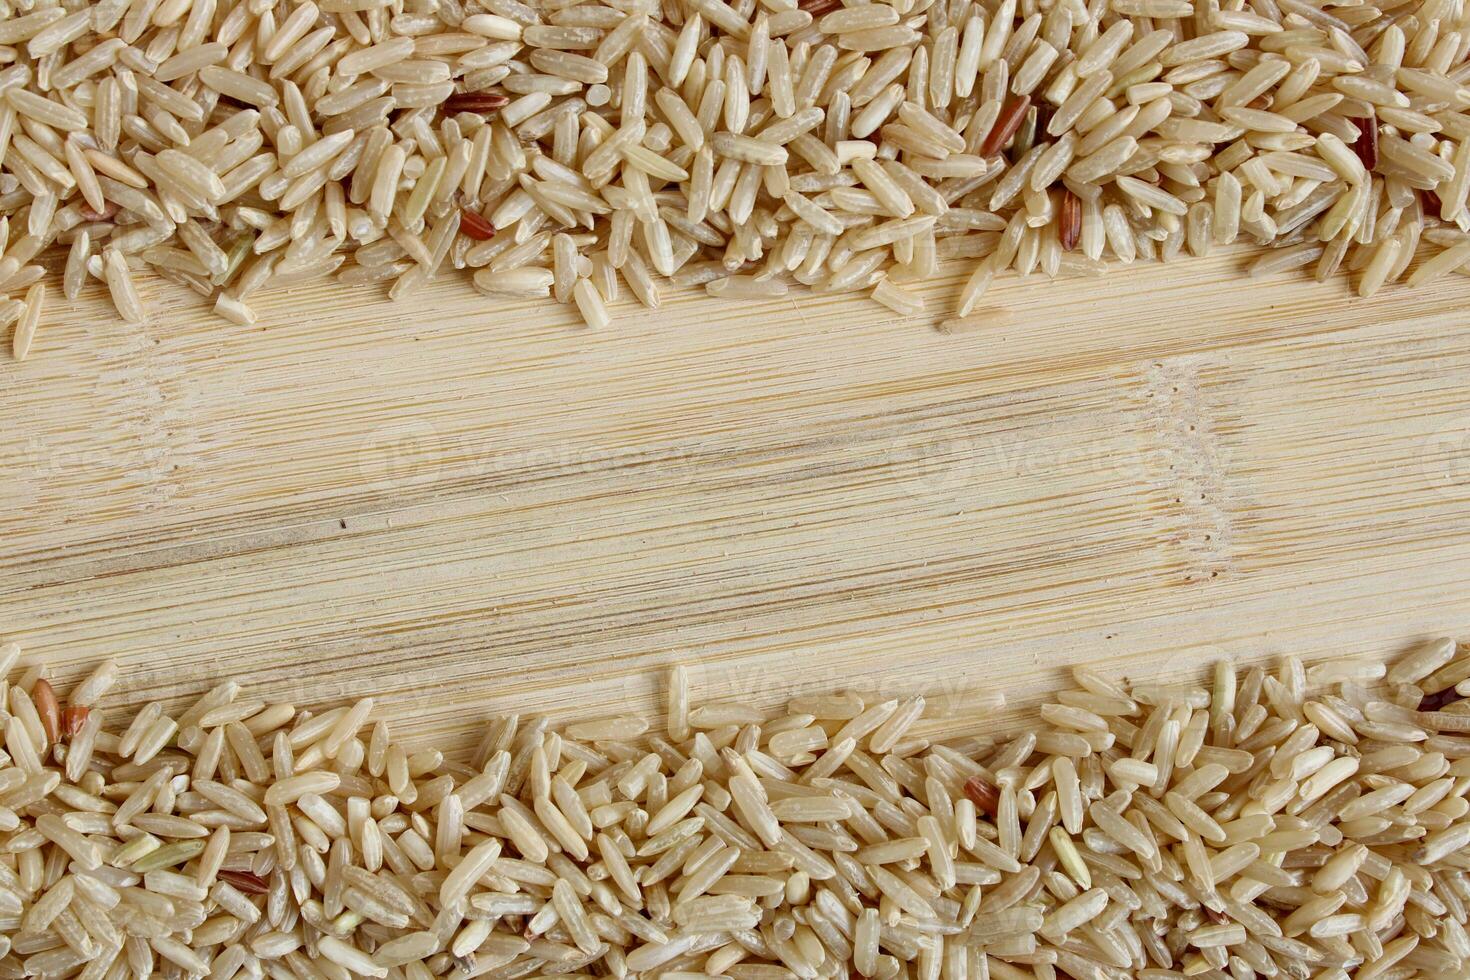 Brown Rice Grains on Wood Surface photo